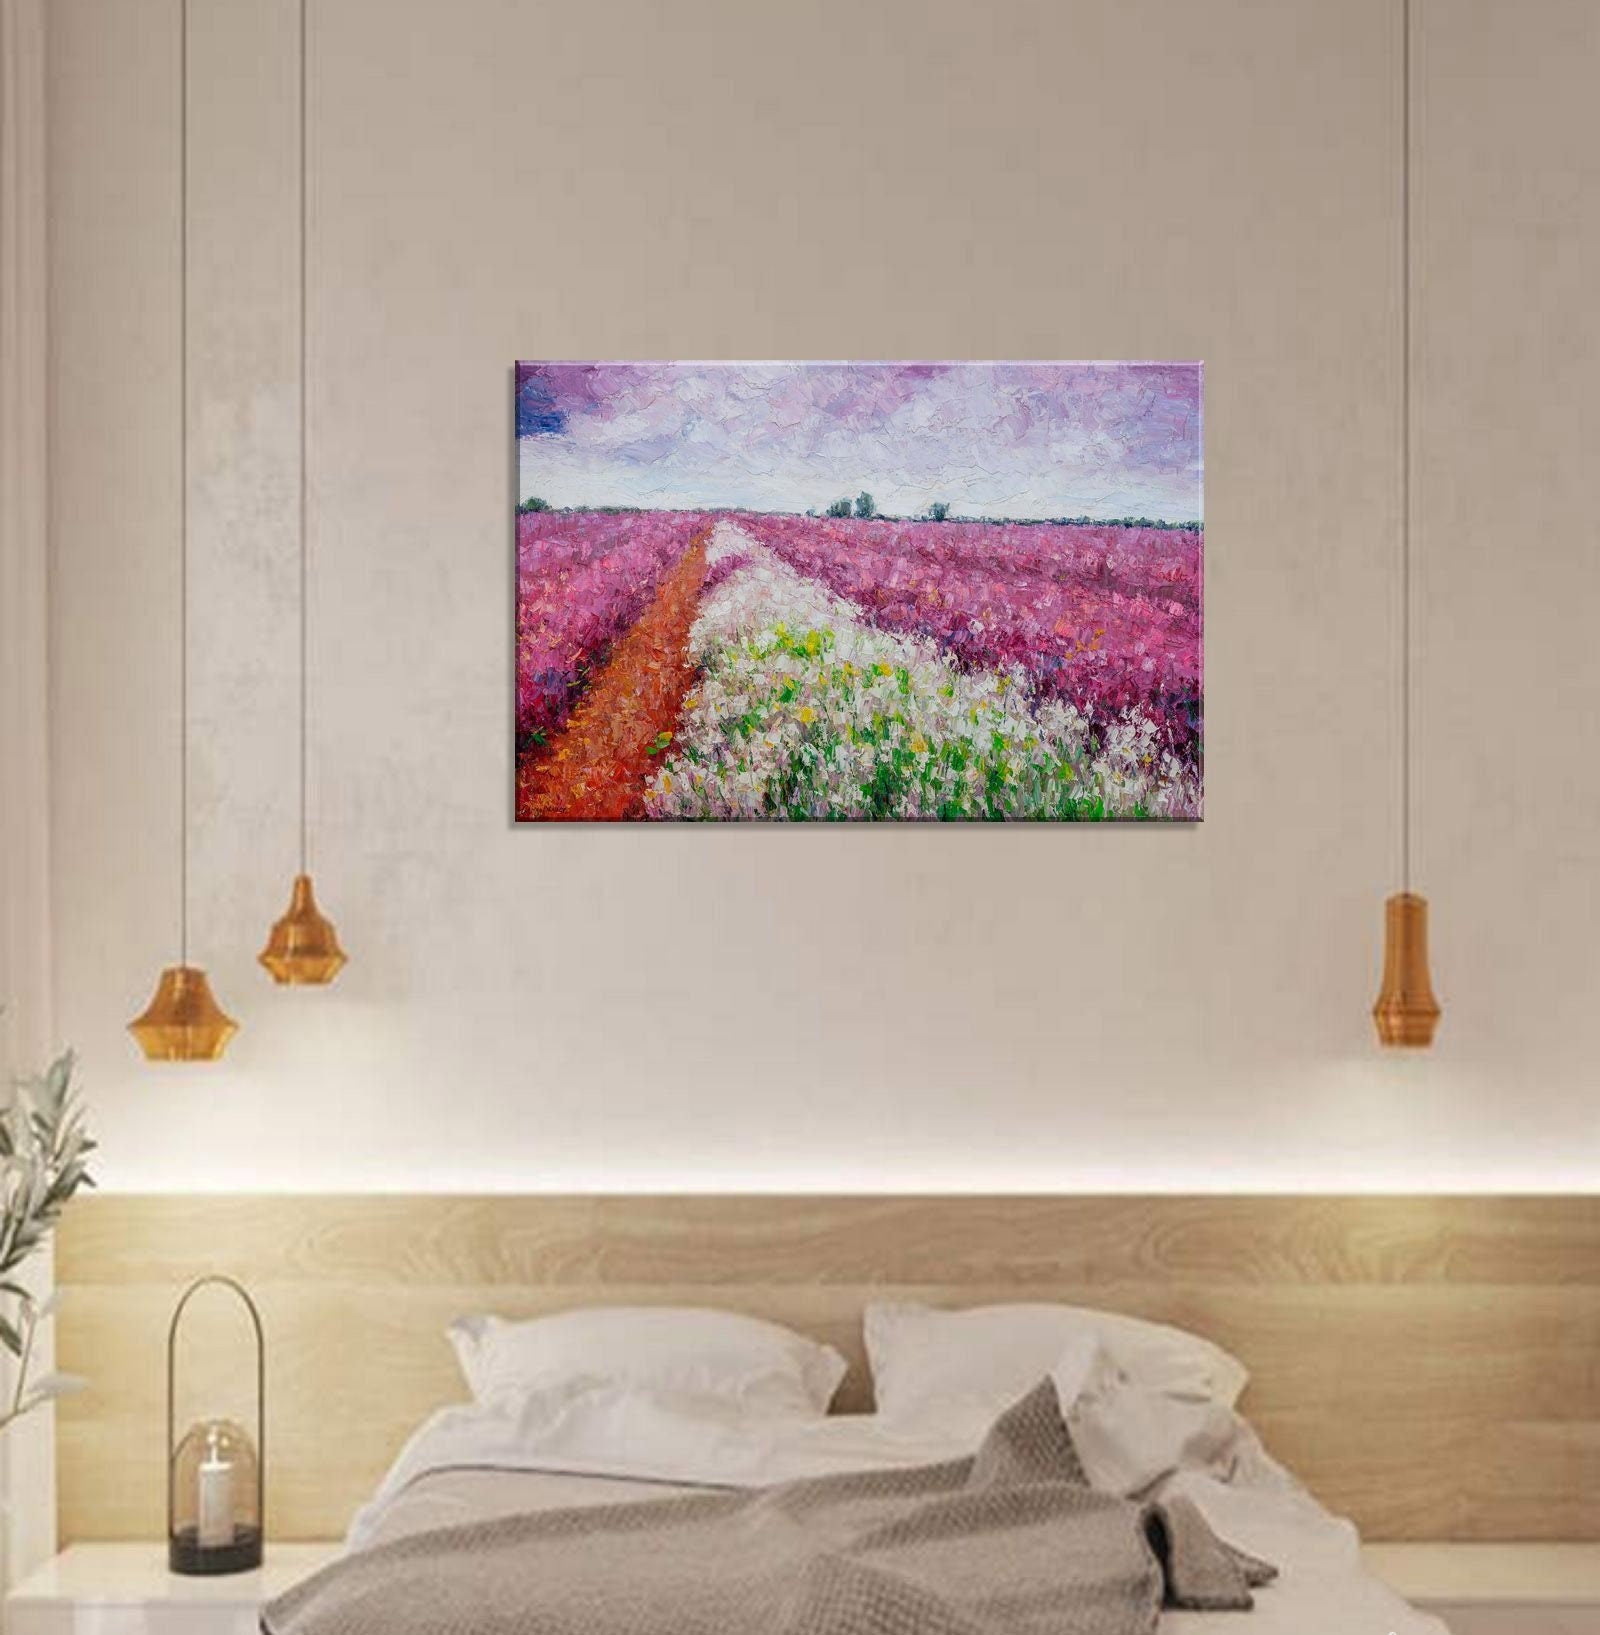 Oil Painting Landscape, Painting Abstract, Wall Decor, Large Art, Landscape Oil Painting, Modern Art, Canvas Painting, Living Room Decor